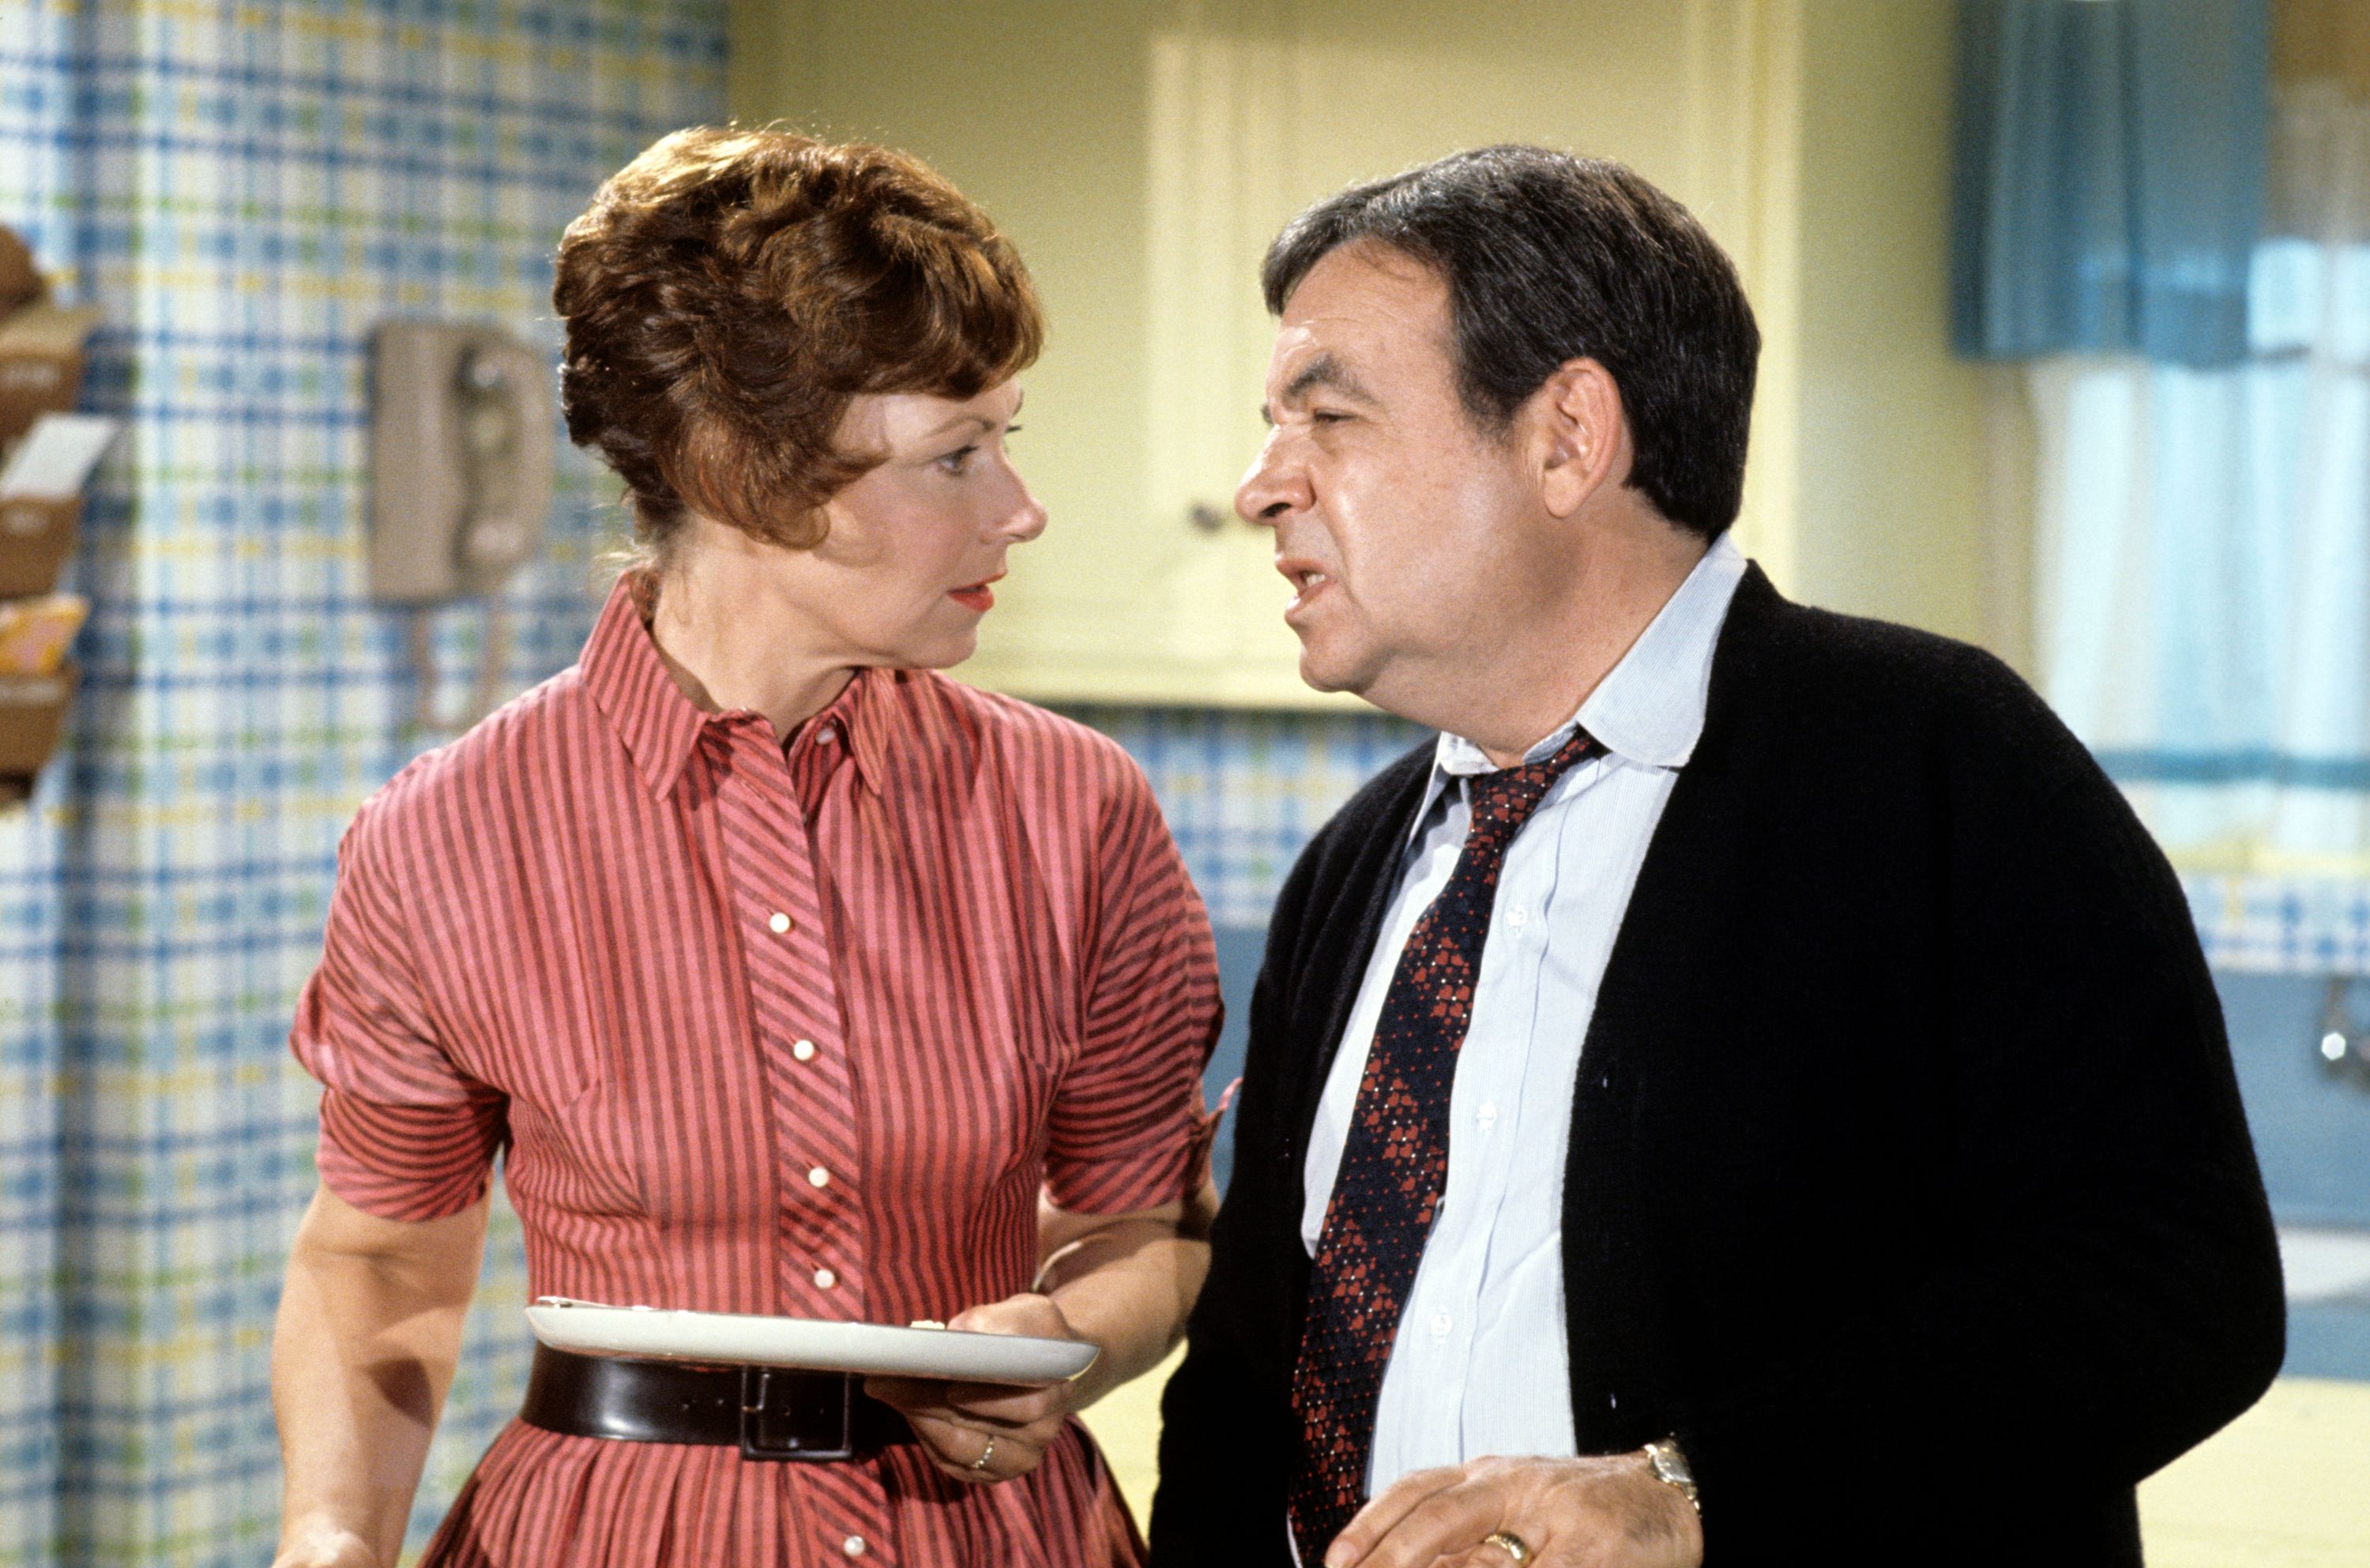 Marion Ross (Marion) and Tom Bosley (Howard) on "All the Way" Season 1, circa 1974. | Source: Getty Images